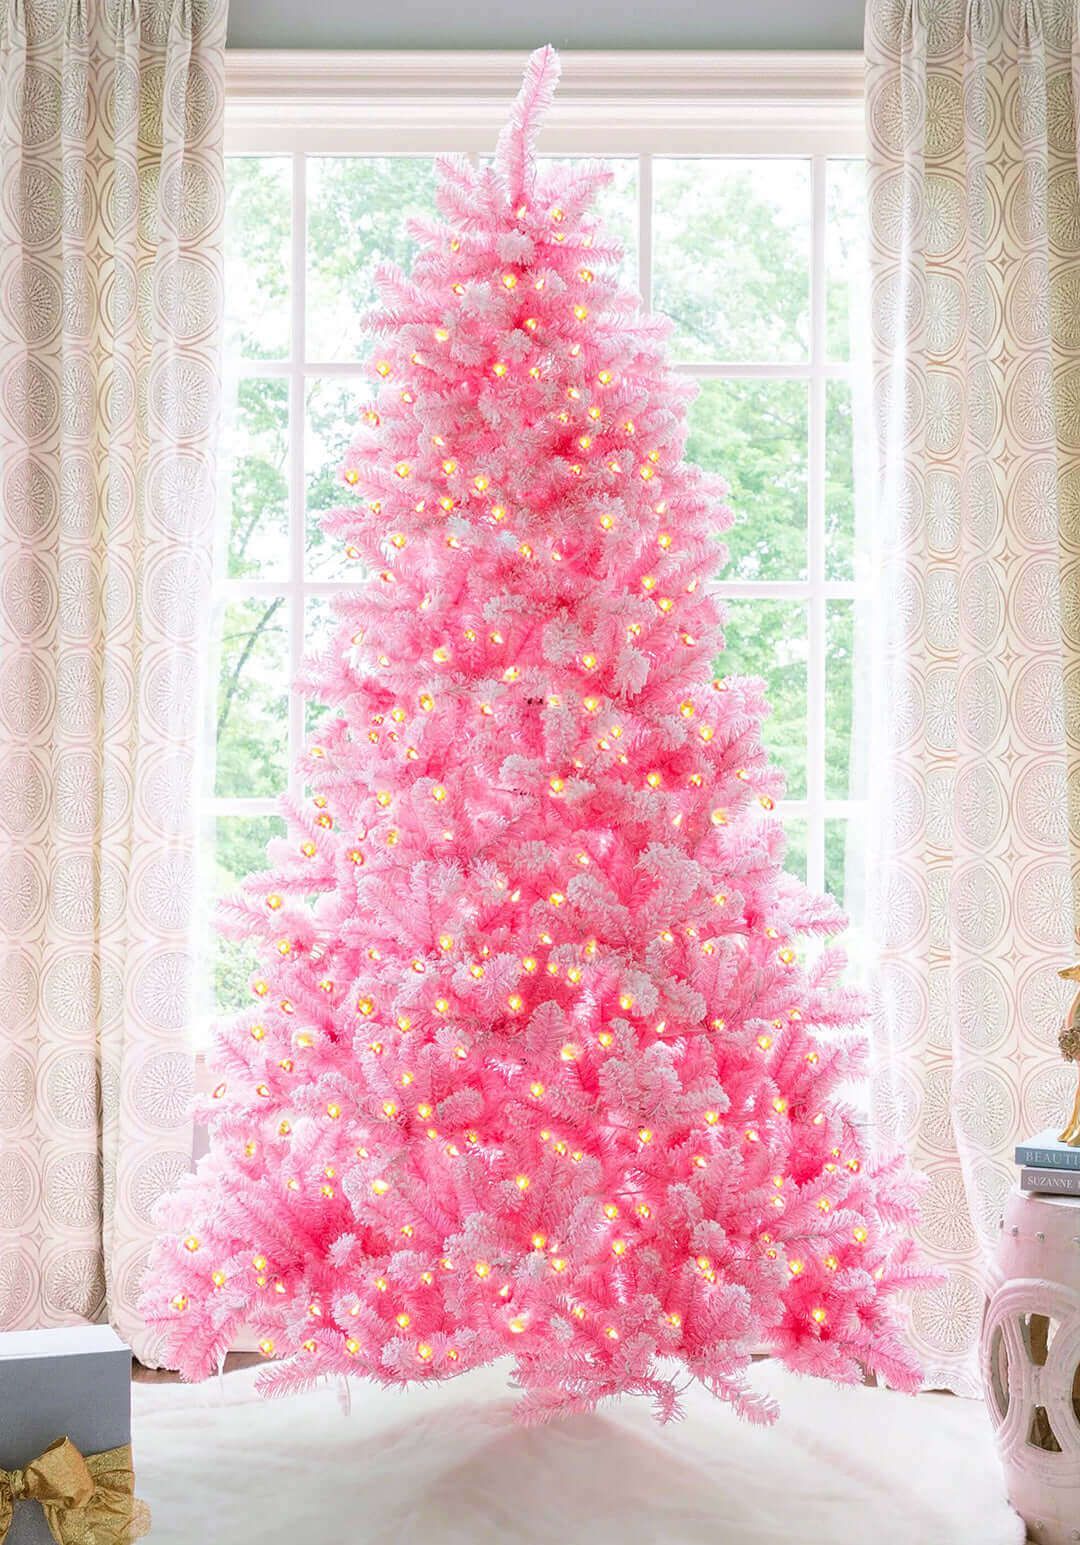 6.5' Duchess Pink Flock Artificial Christmas Tree with 500 Warm White LED Lights | King of Christmas